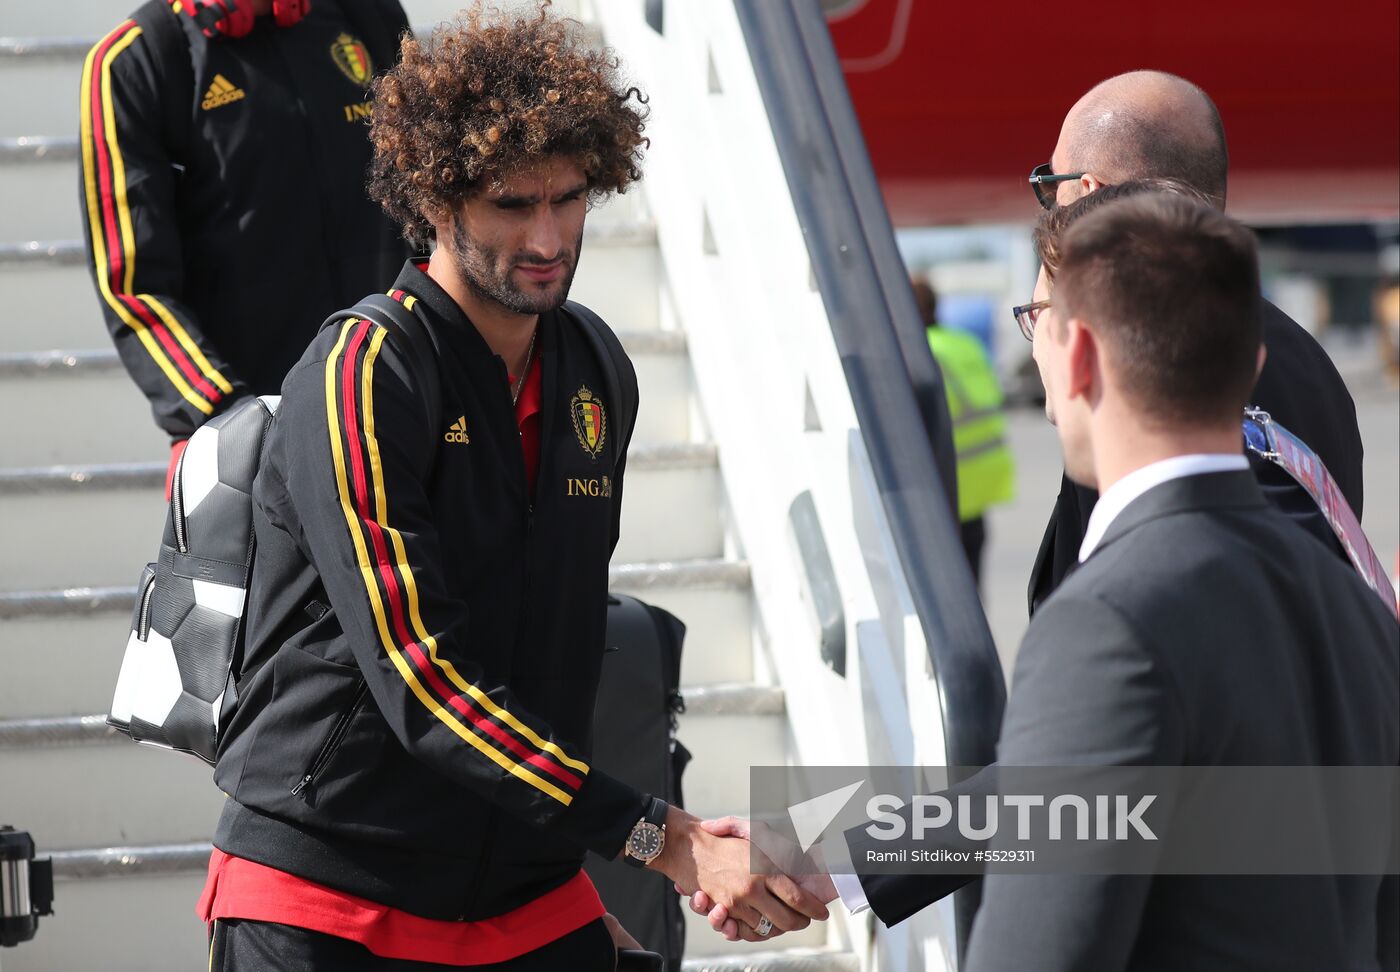 Russia World Cup Belgium Arrival